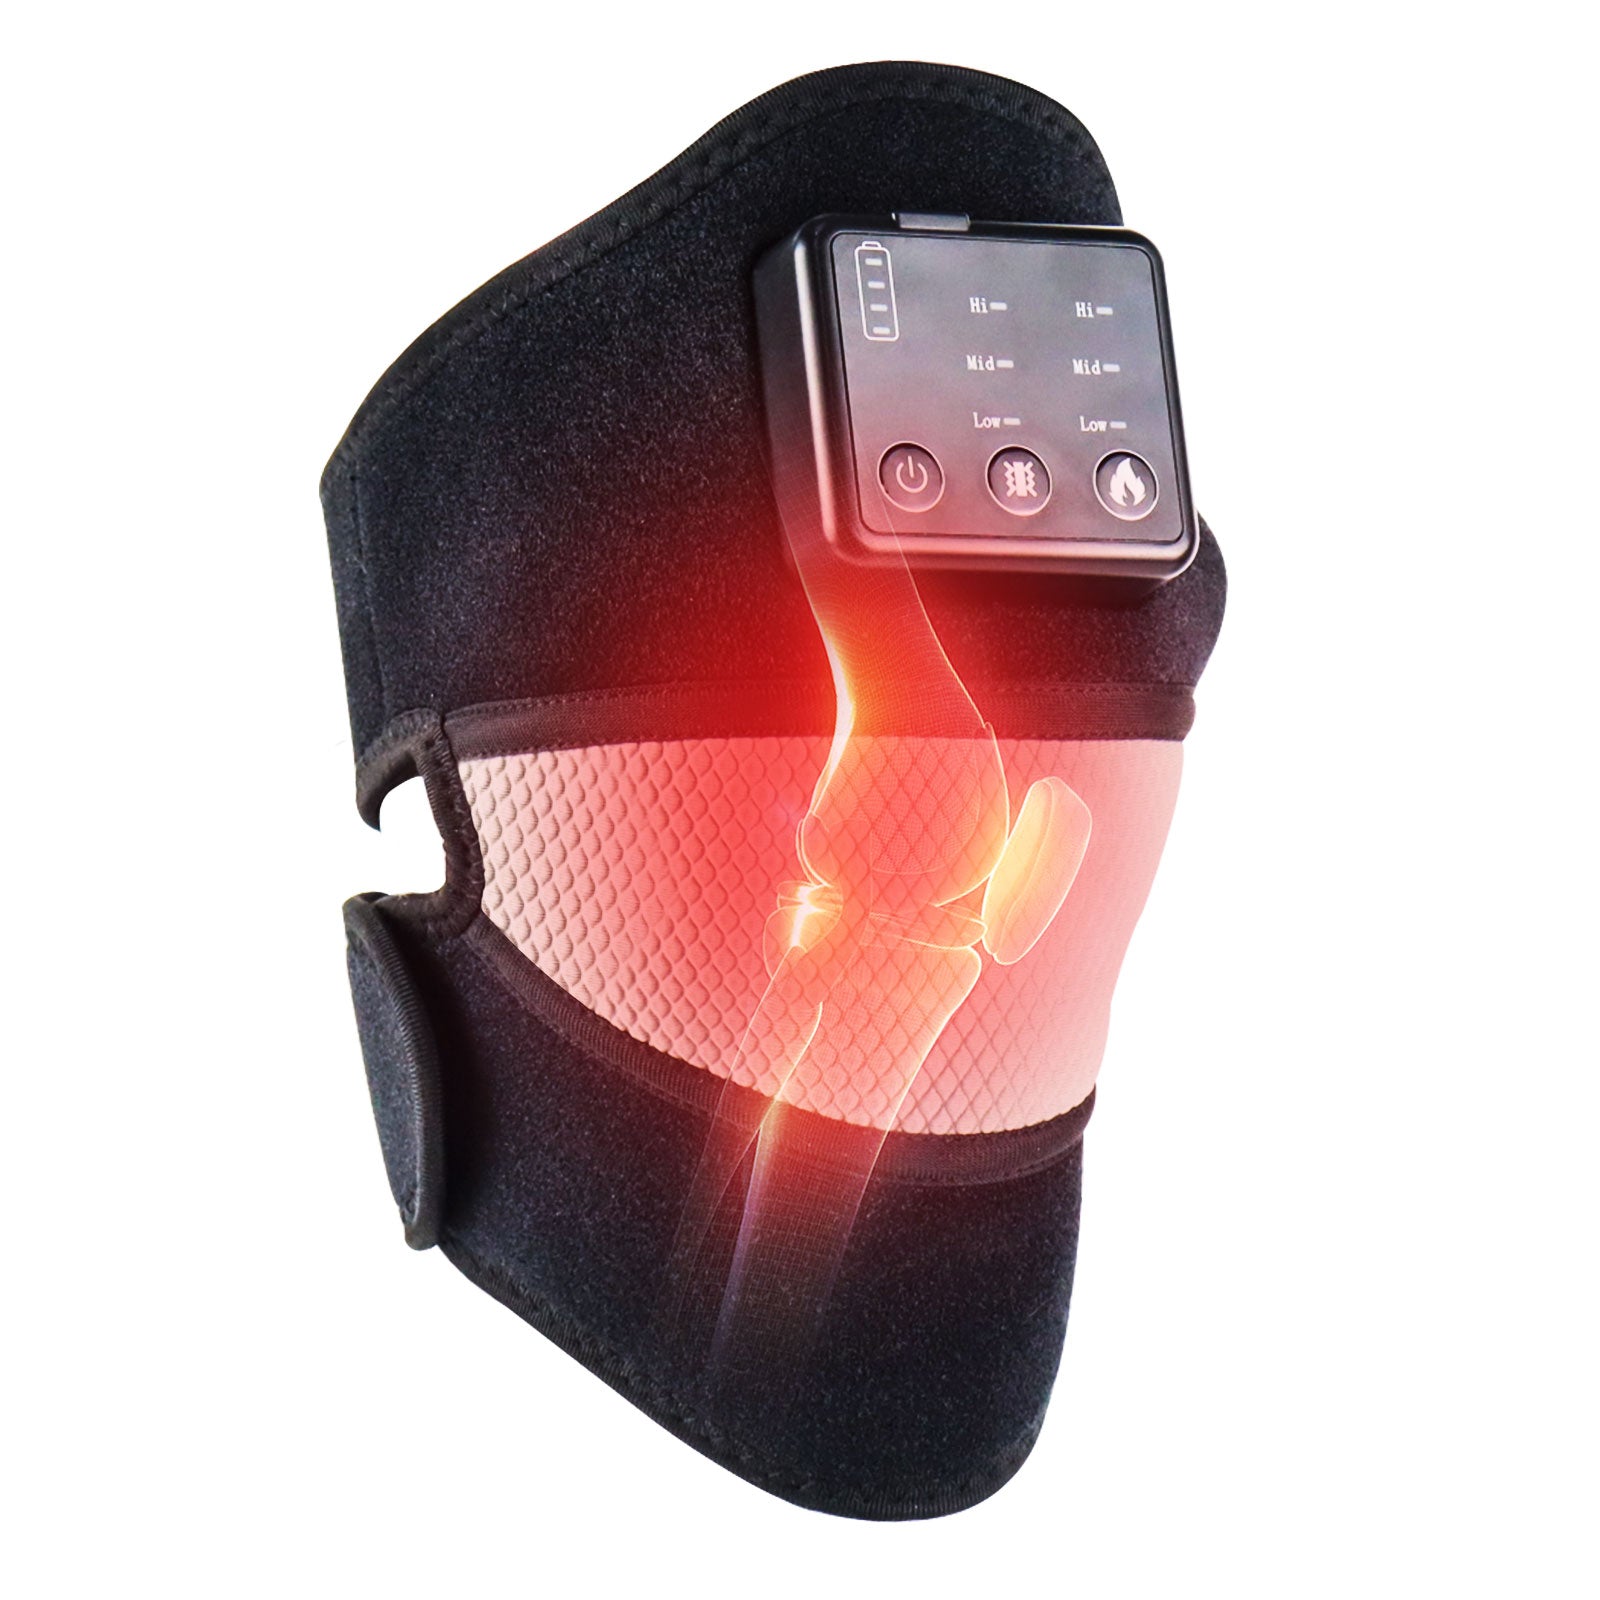 Heated and Vibration Knee Massager Brace Wrap, Electric Heating